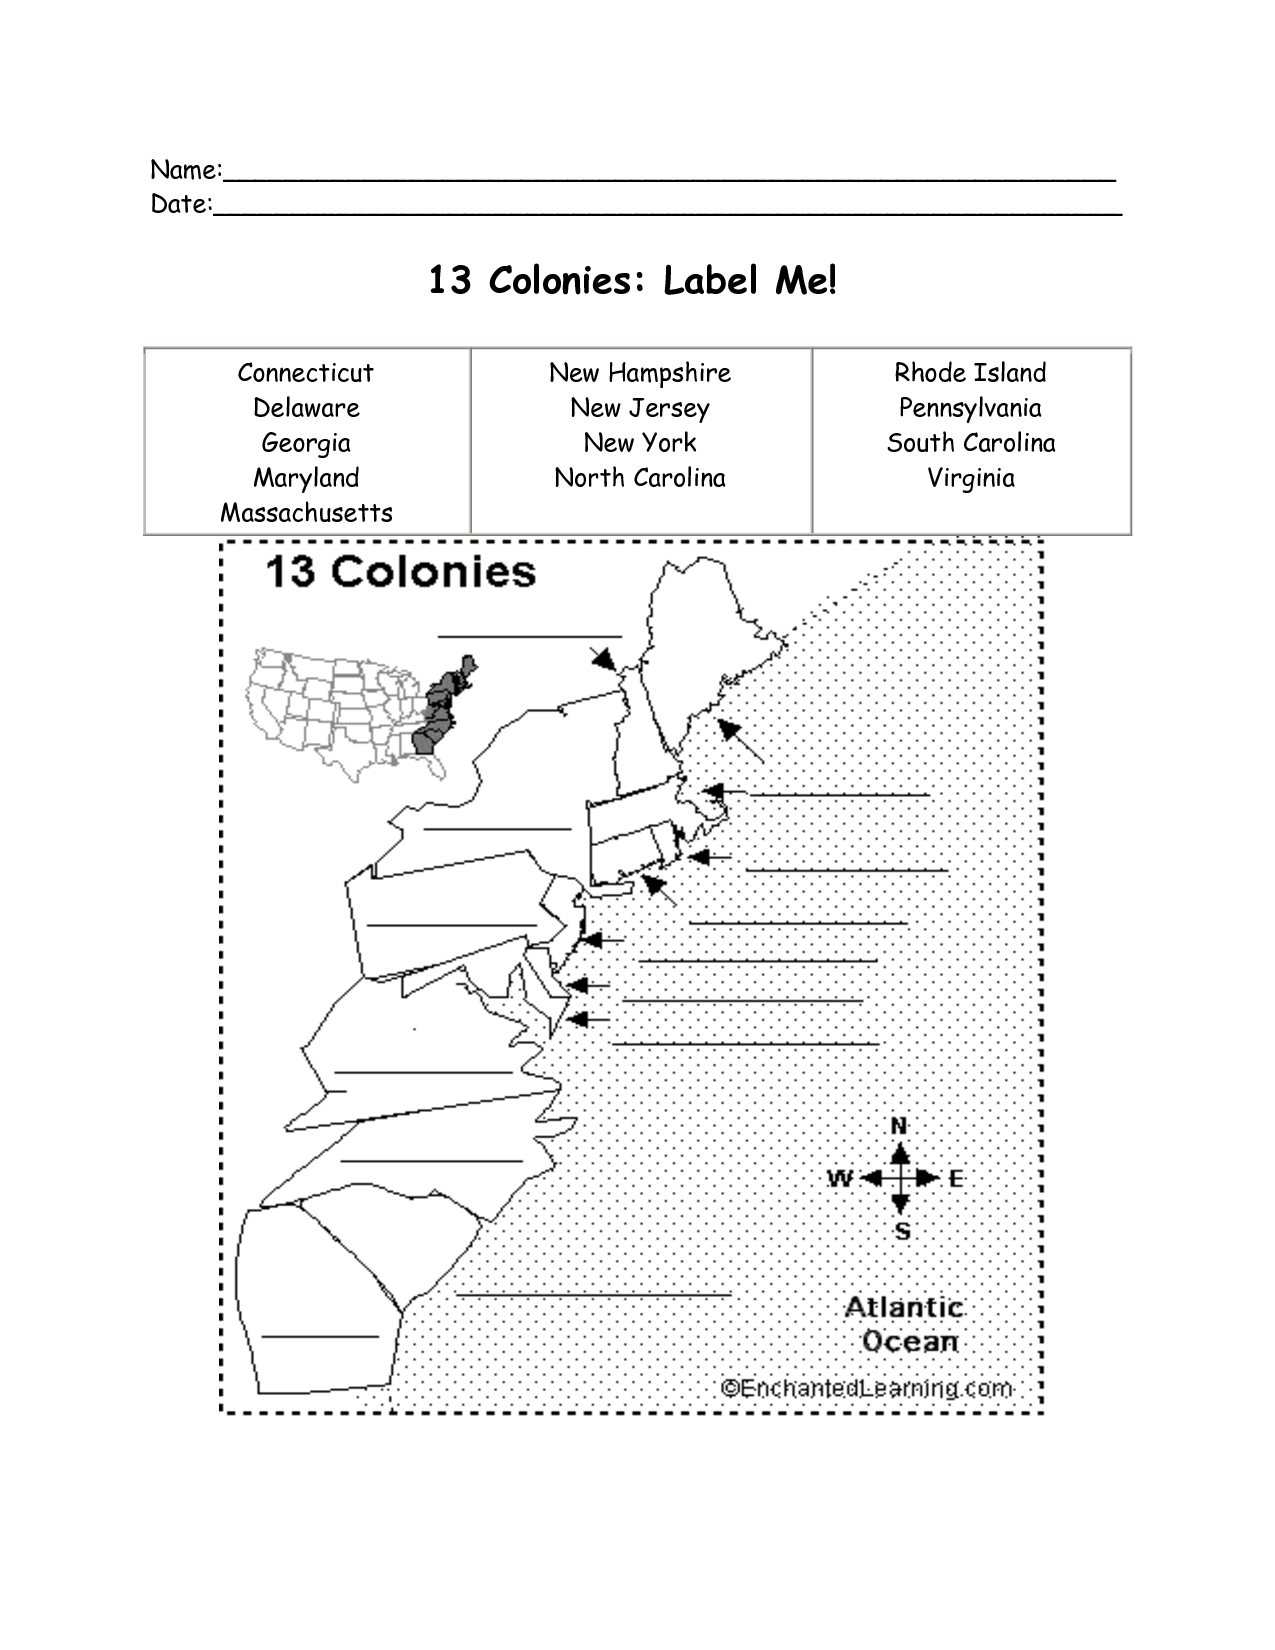 13-colonies-united-states-of-america-teaching-resources